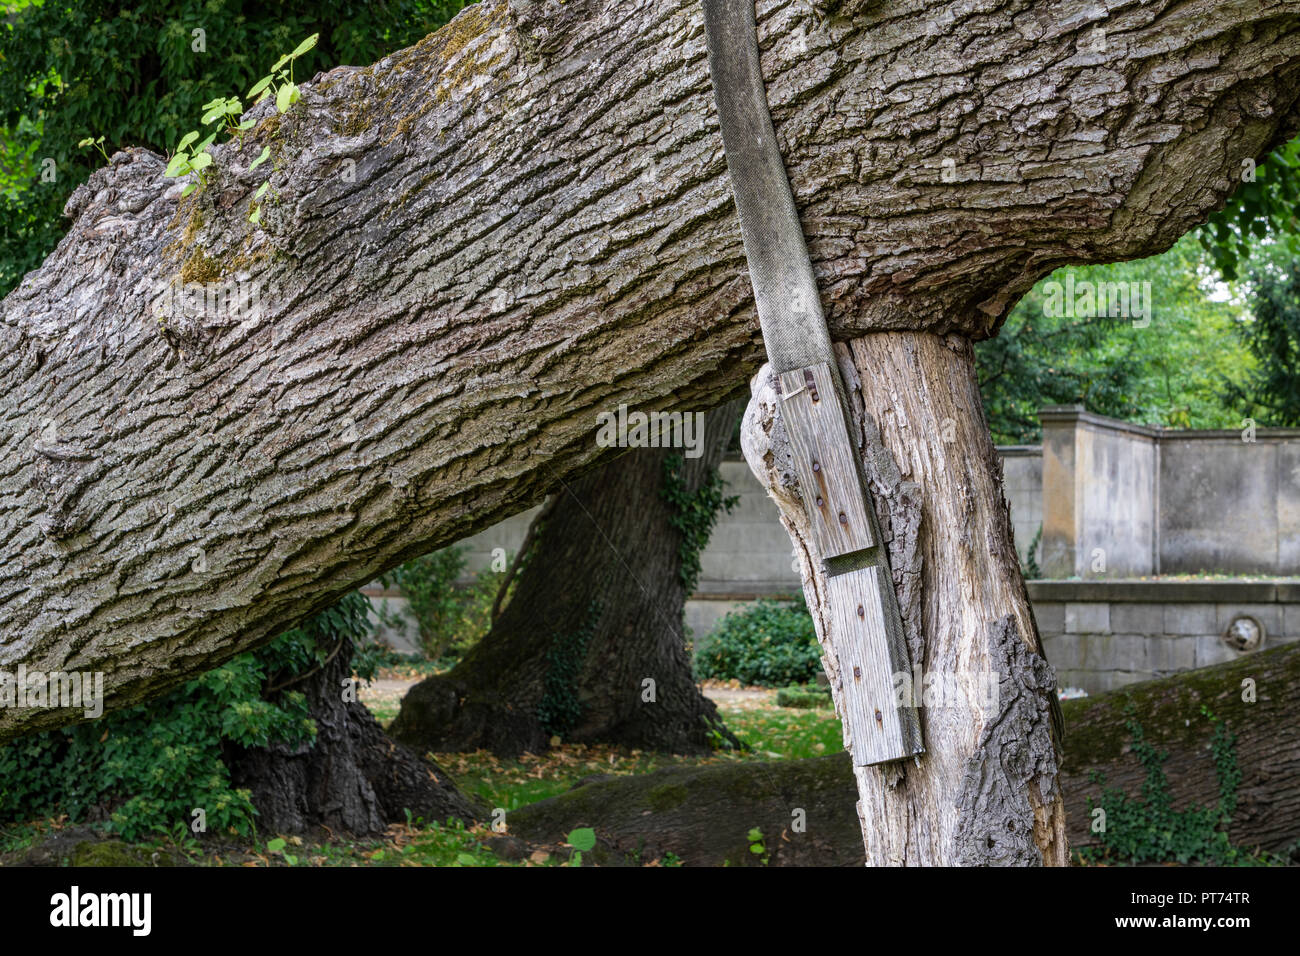 Berlin, Germany, September 10, 2018: Close-Up of Wooden Support for Weak and Heavy Branch of an Old Tree Stock Photo